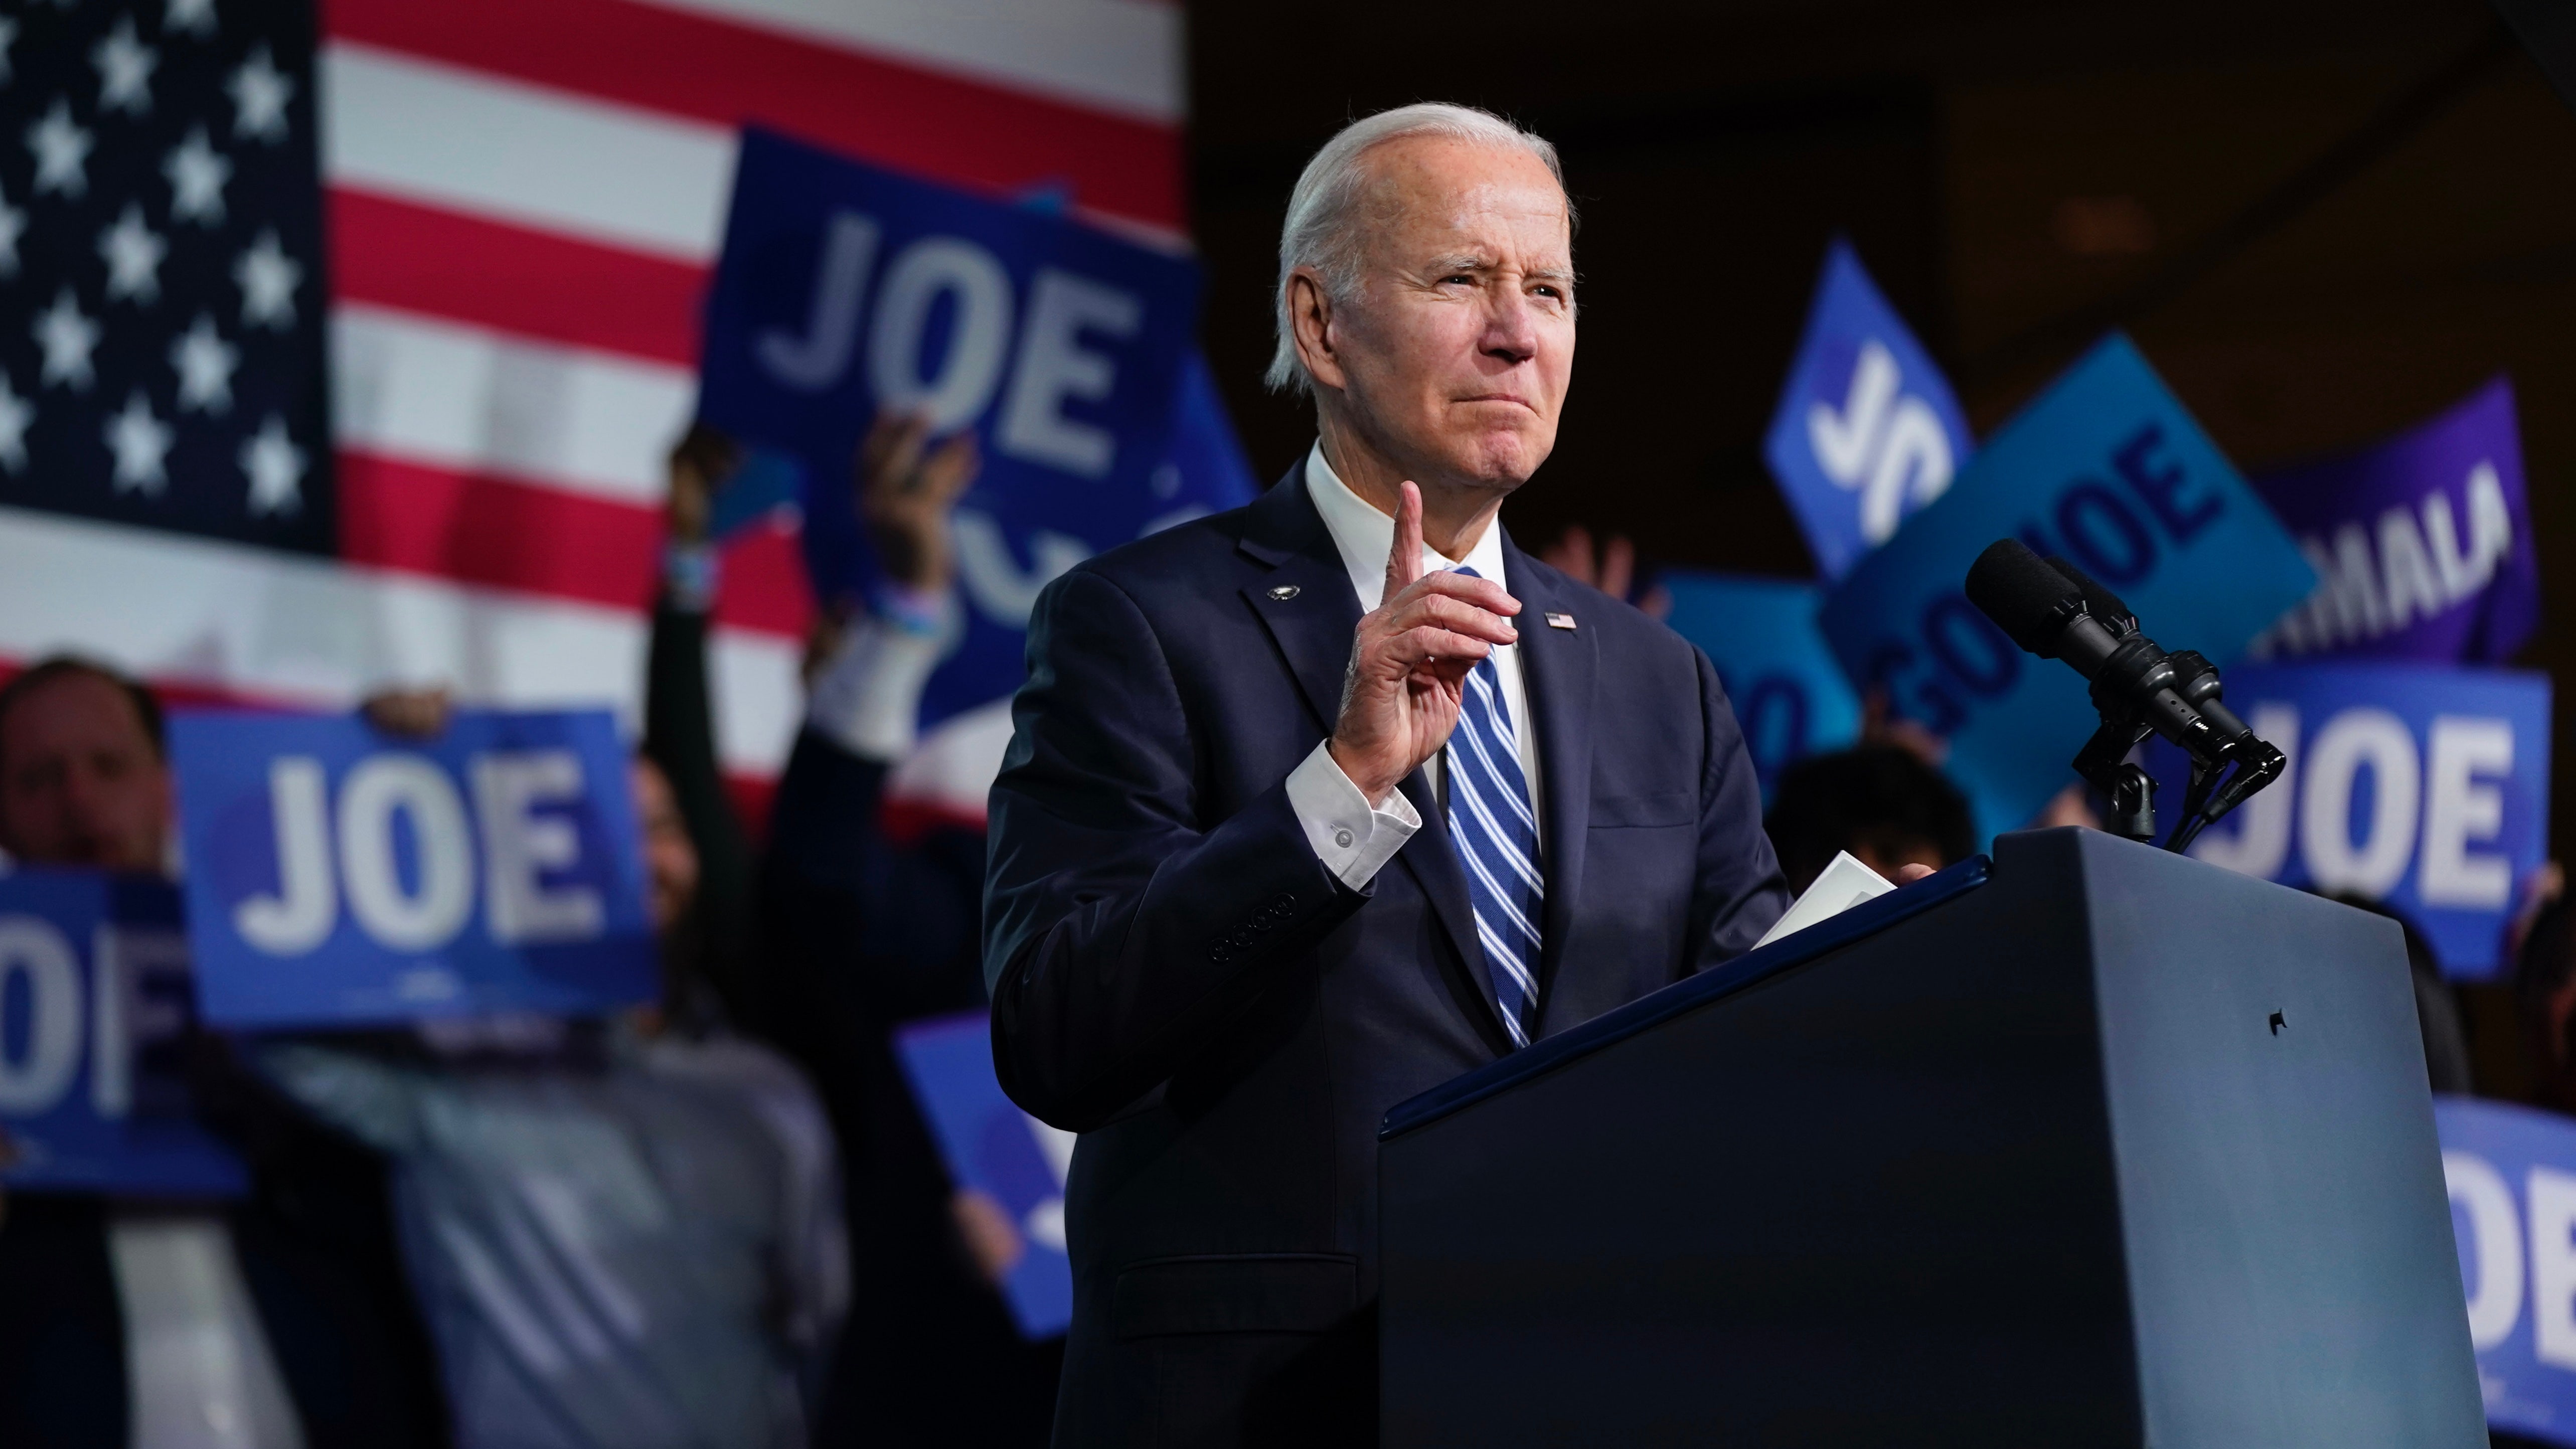 Growing signs that Biden could face a 2024 nomination challenge in this key early primary state